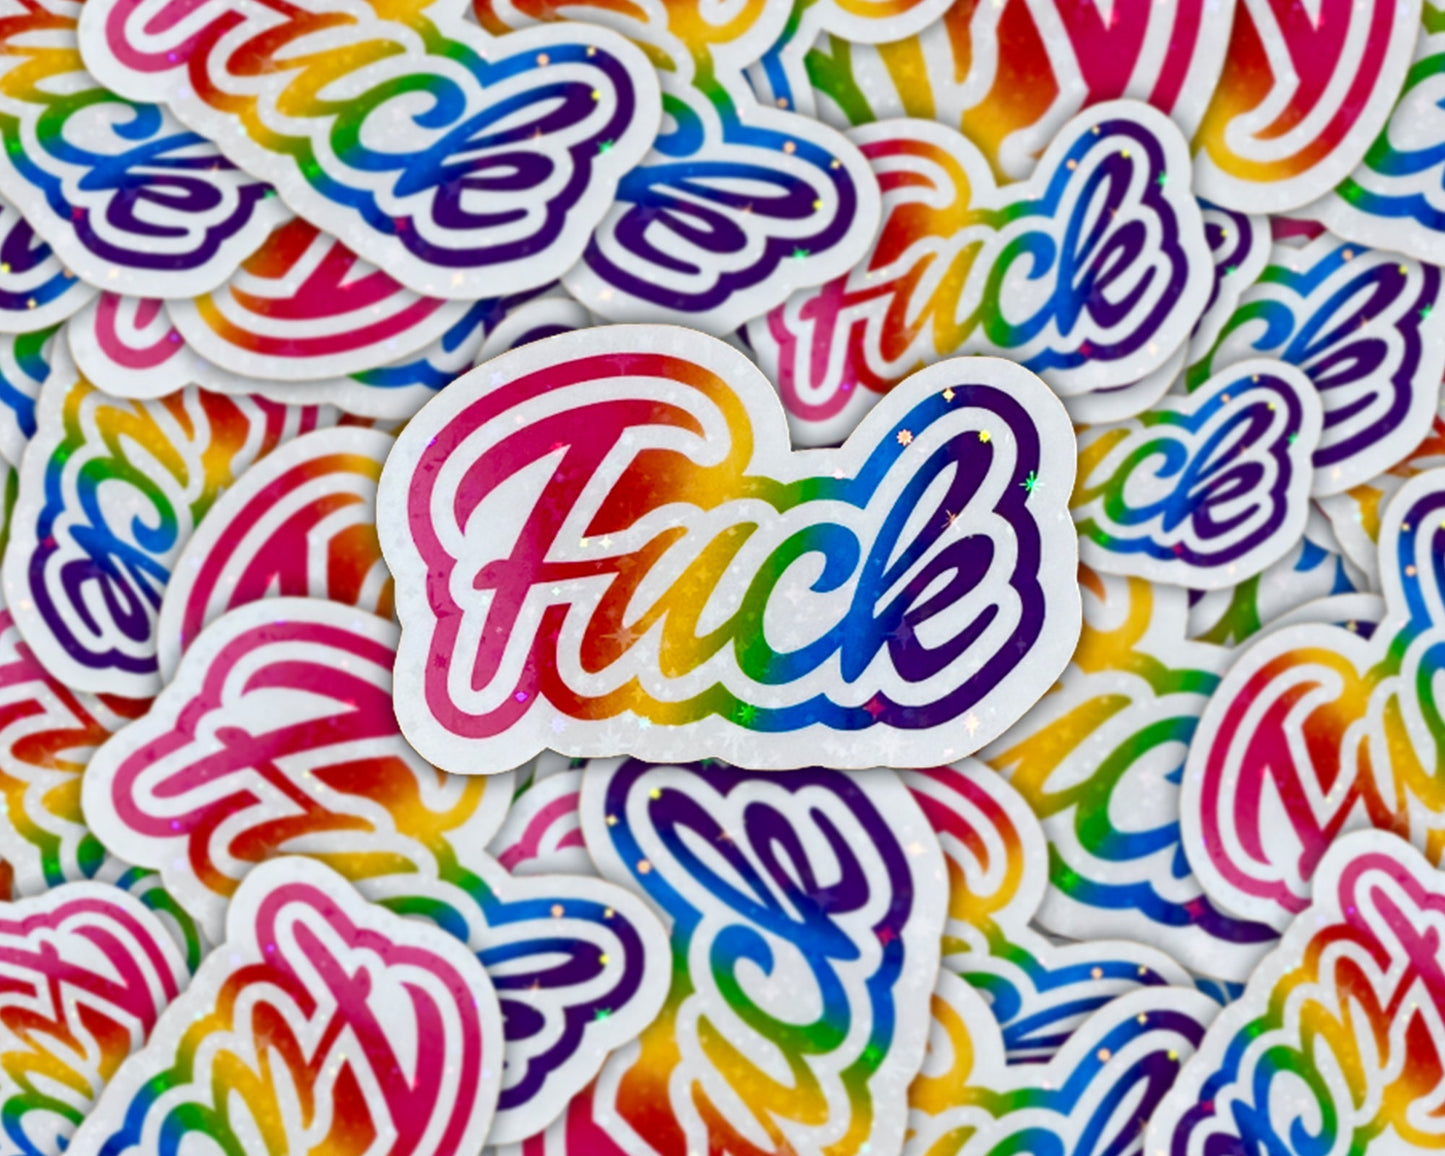 cuss word stickers, funny stickers, 90's stickers, 80's baby, 90's made, adult humor sticker, f-bomb, fuck sticker, f this, wtf, last fuck